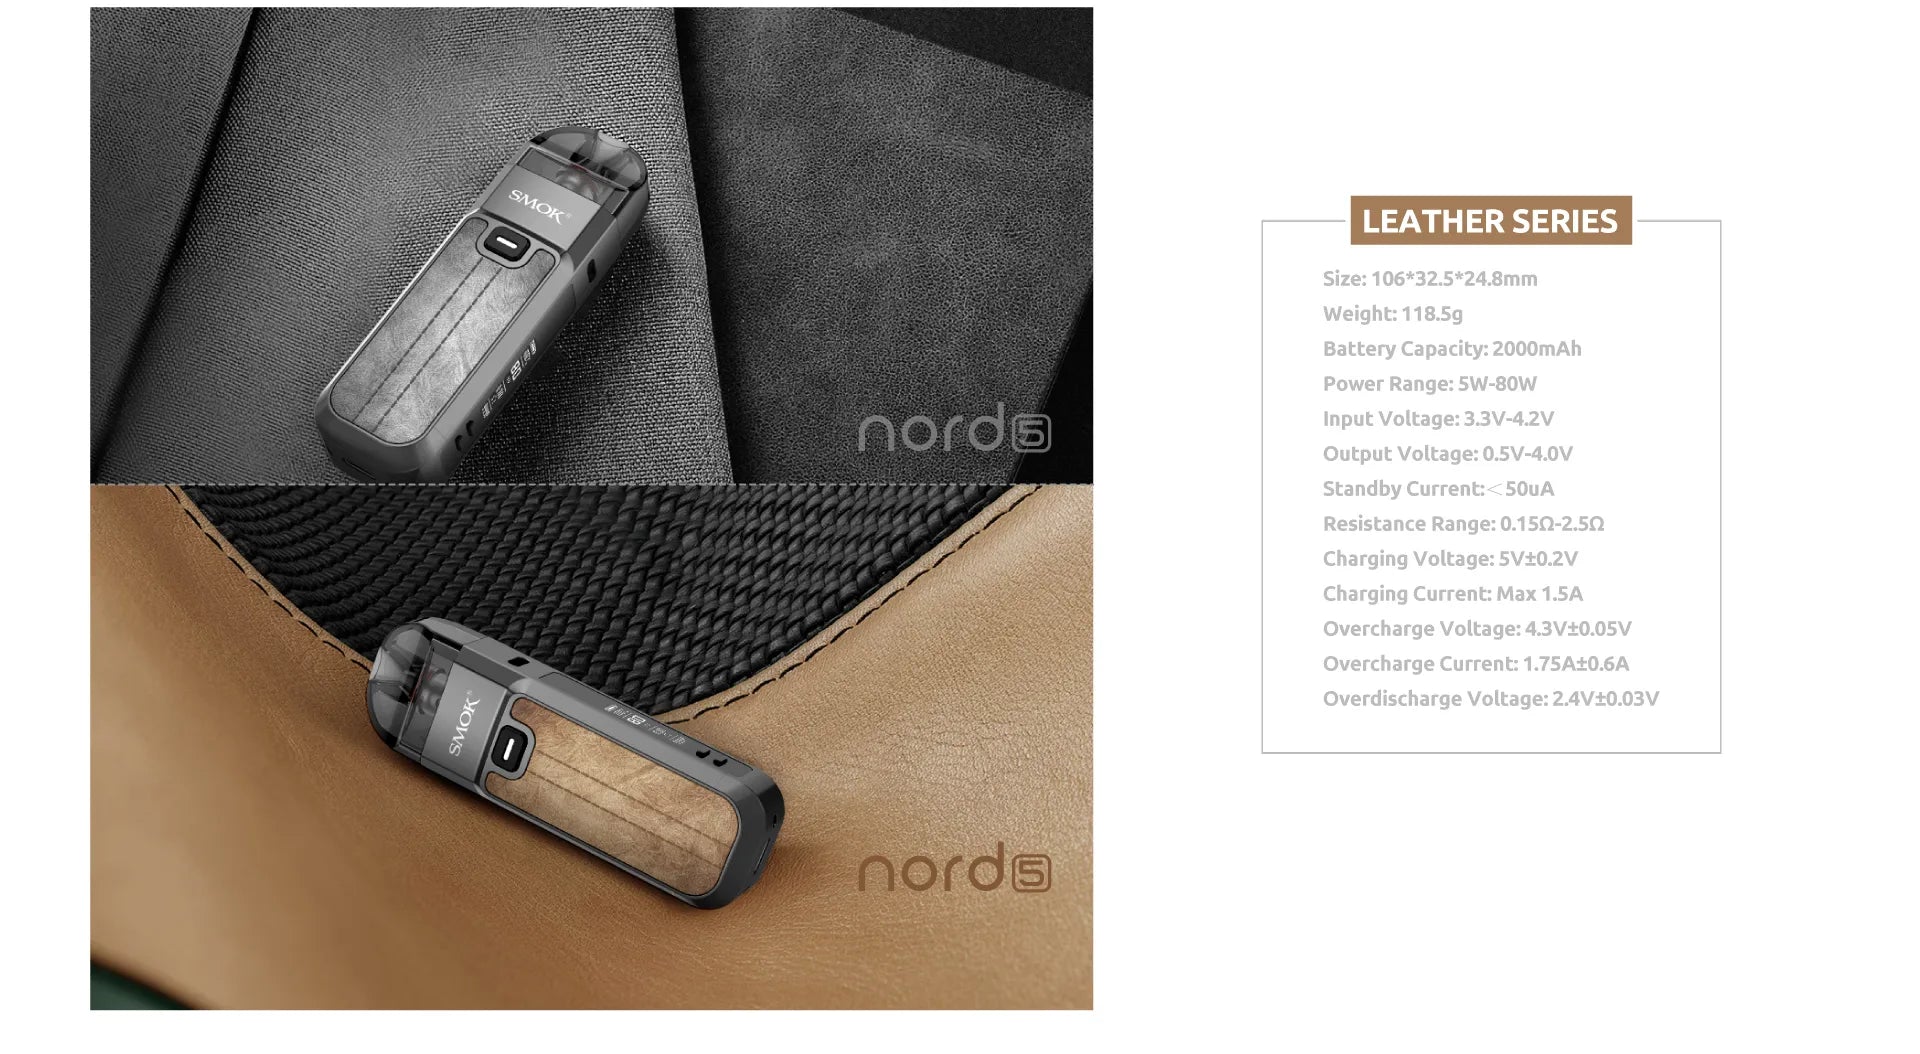 Smok Nord 5 Leather Series Features